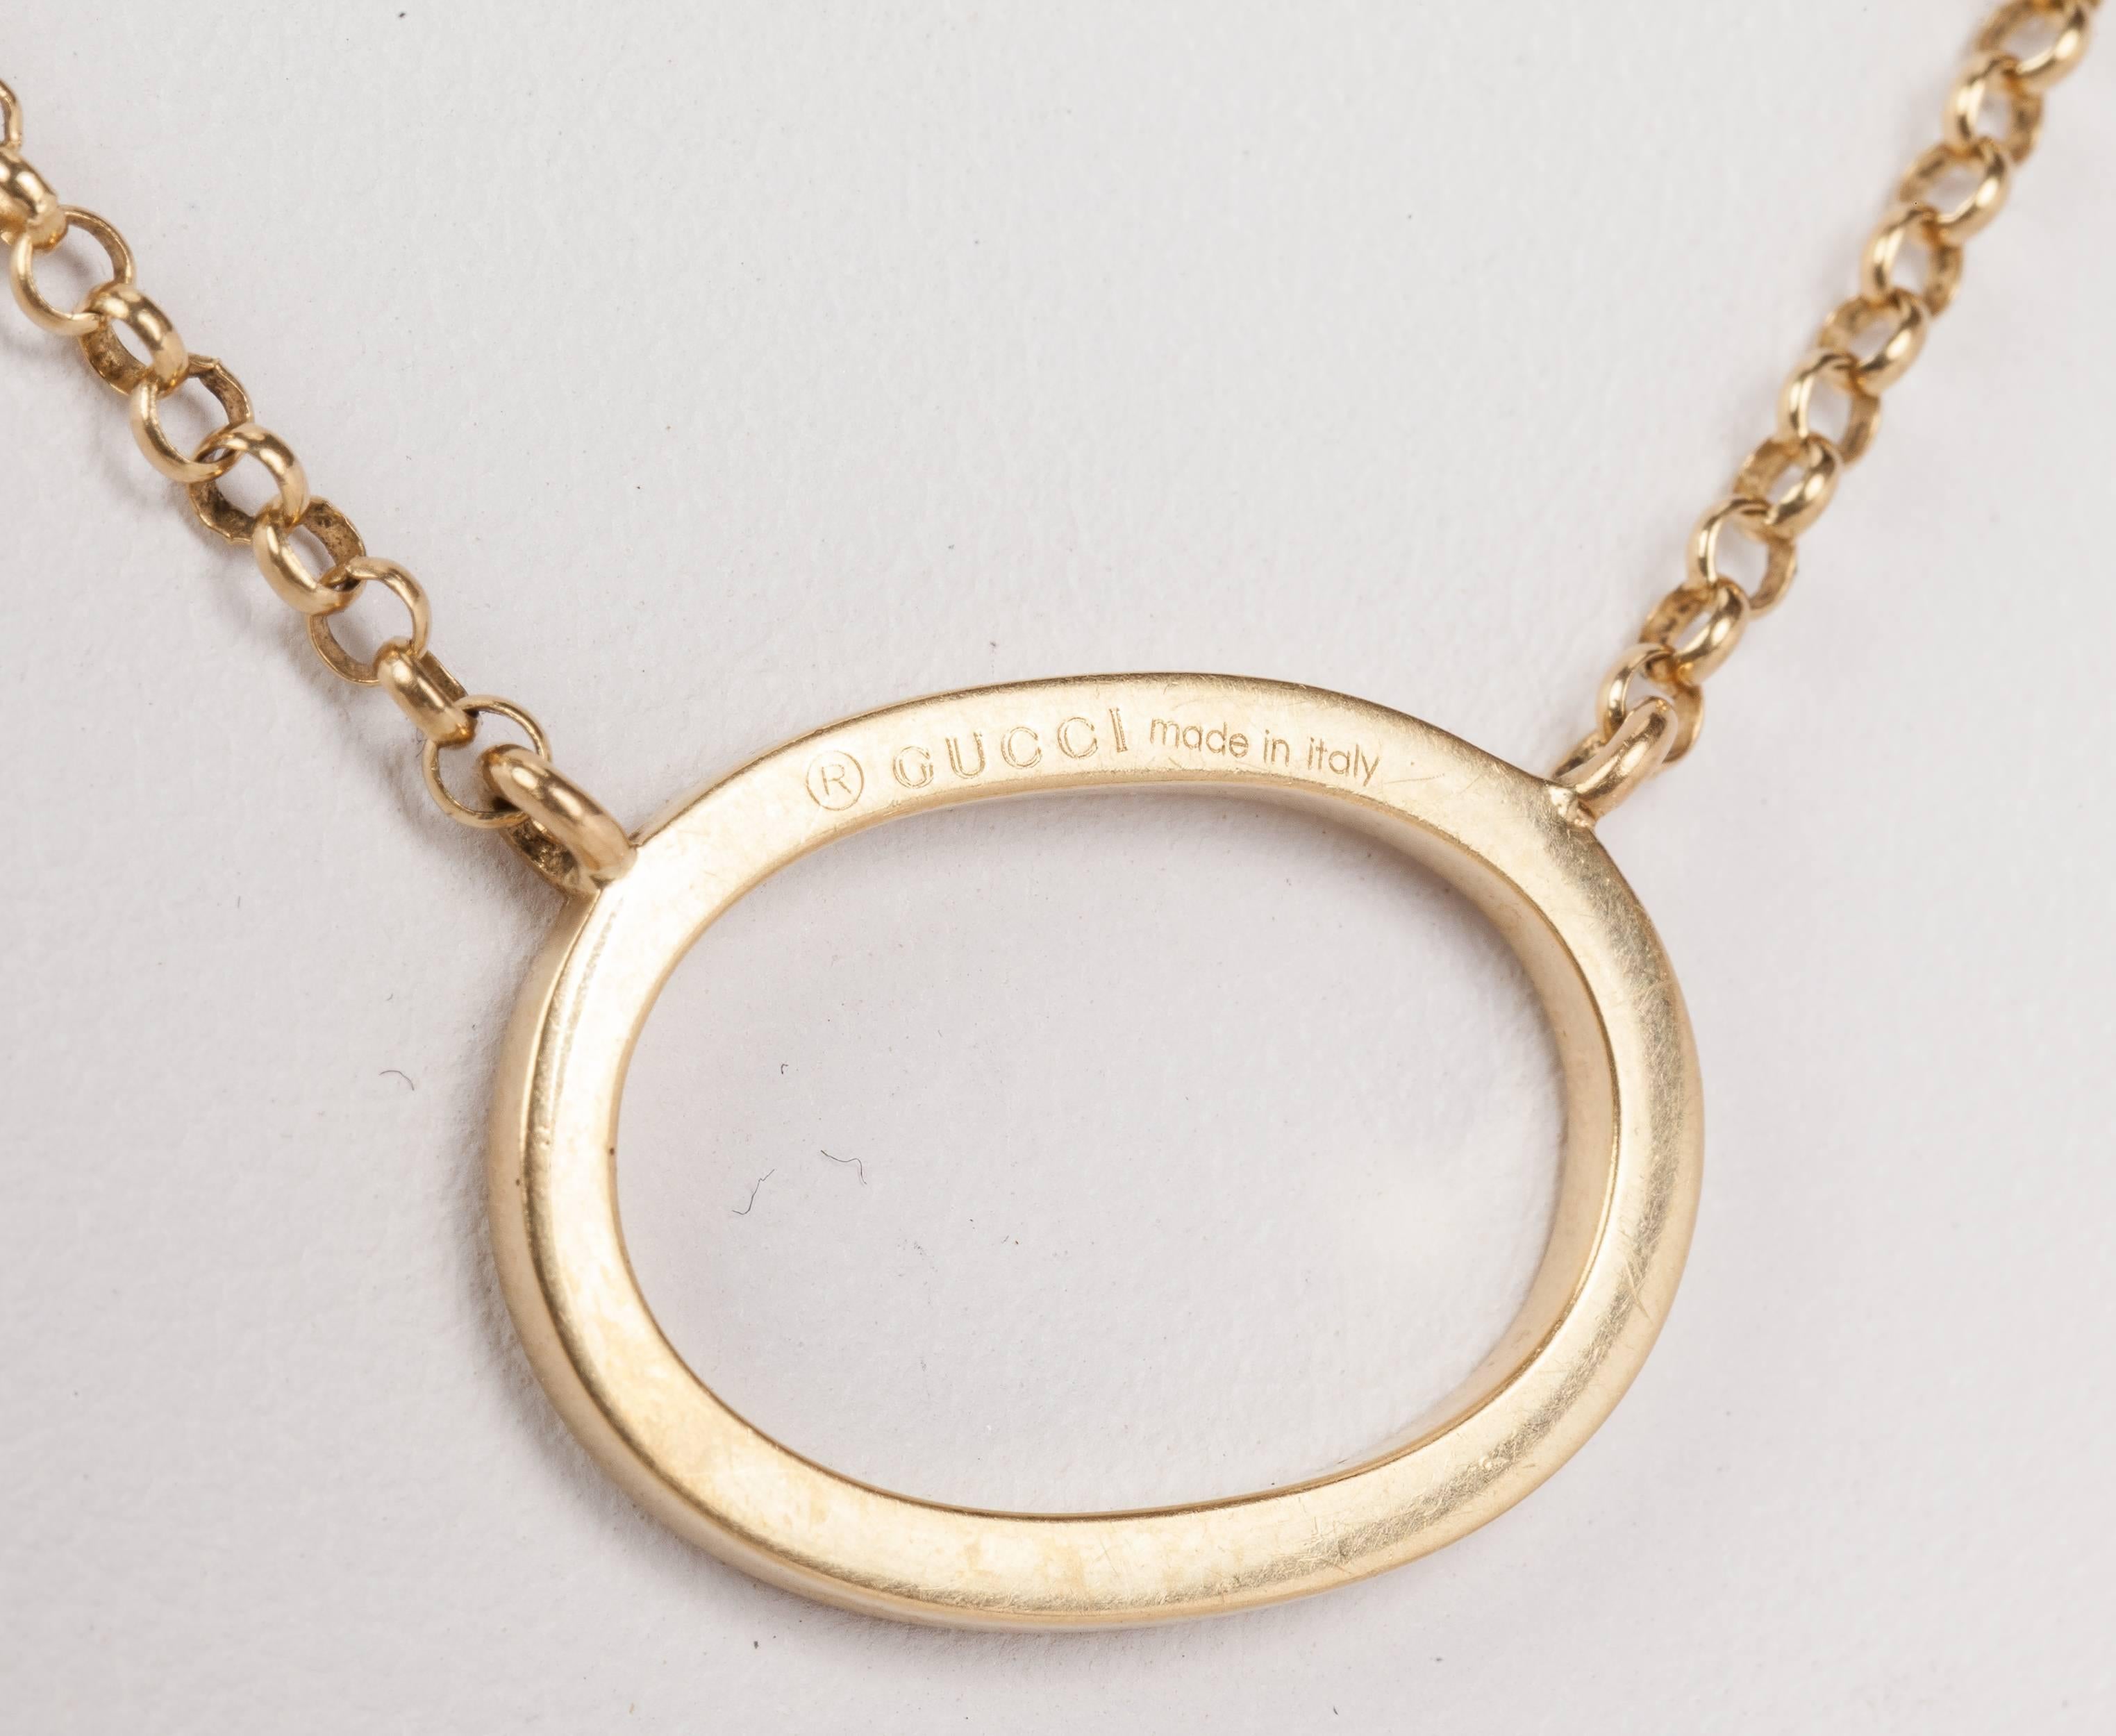 Gucci 18K yellow gold oval pendant necklace. The total weight of the necklace is 6.6 grams. The necklace is 16 3/4